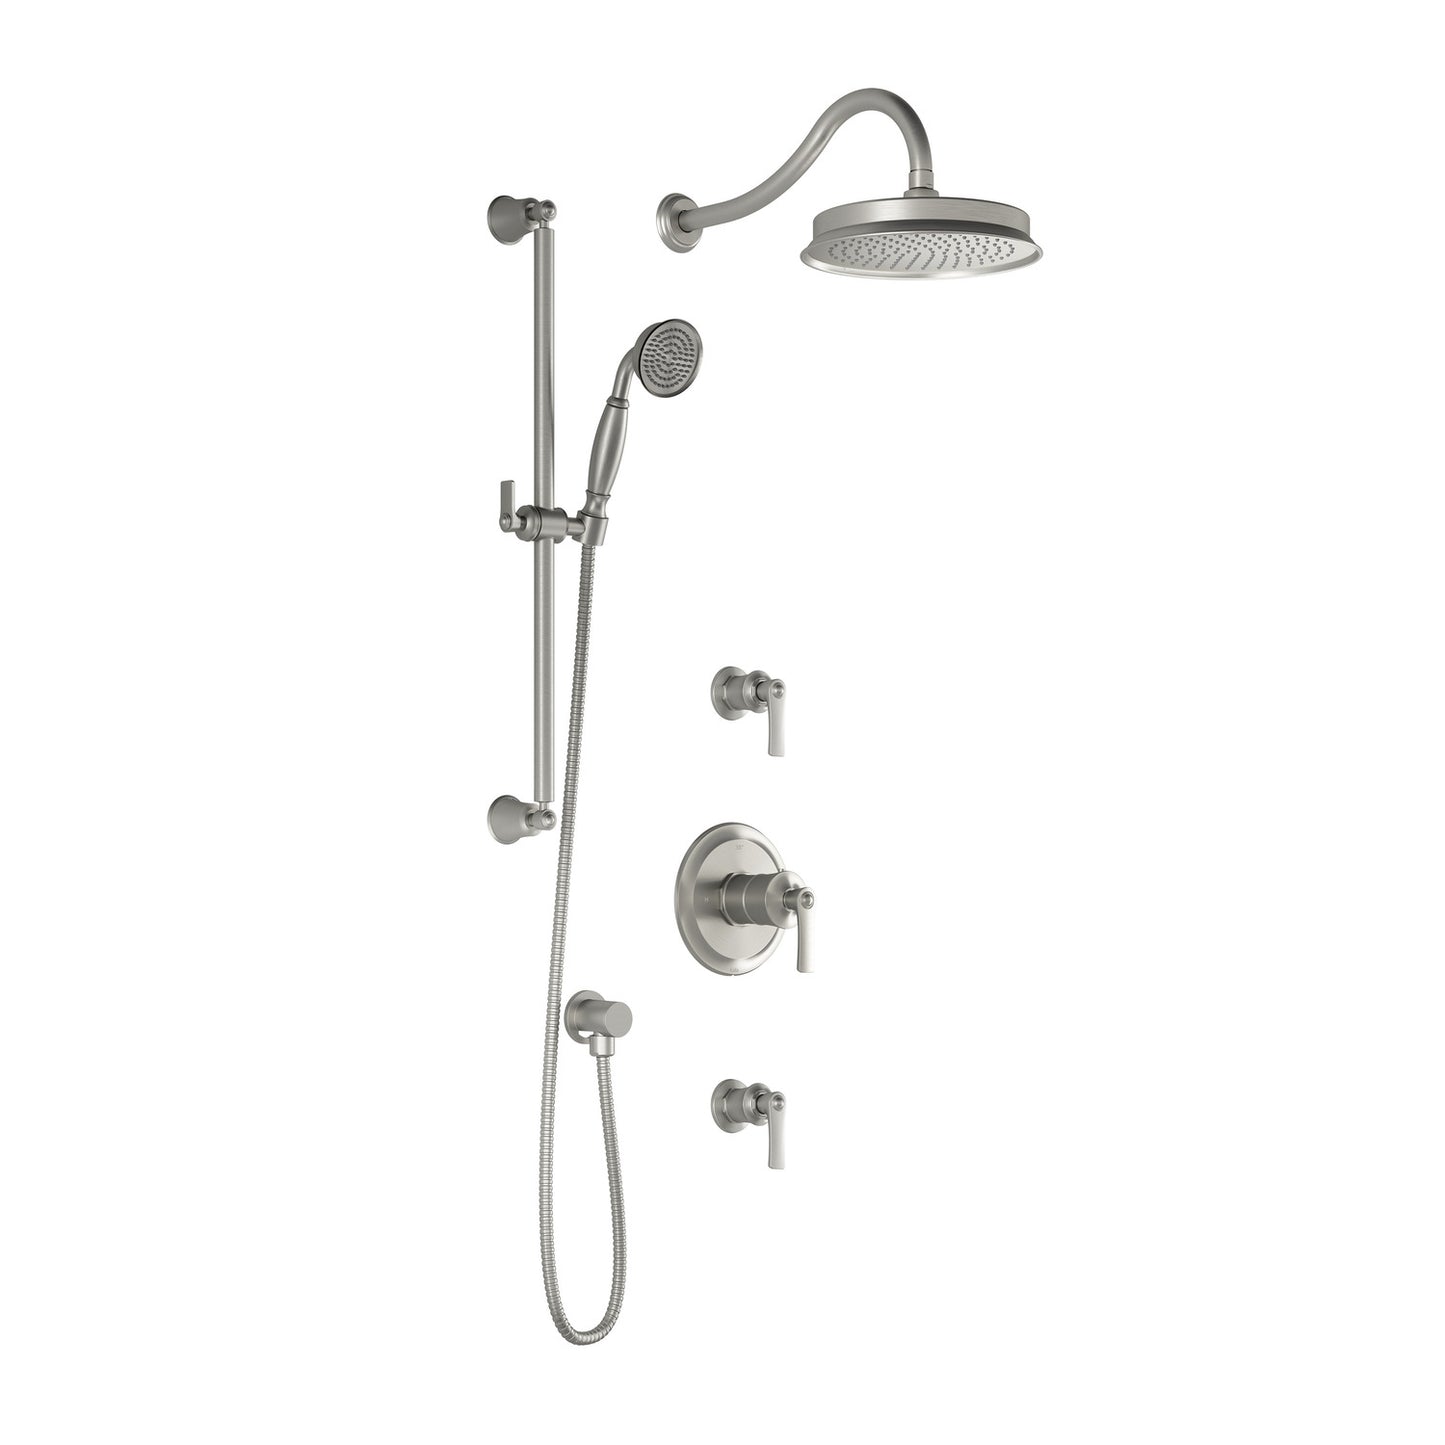 Kalia RUSTIK T2 AQUATONIK T/P Shower System with 9" Round Shower Head and Hand Shower and Wall Arm (BF1488)